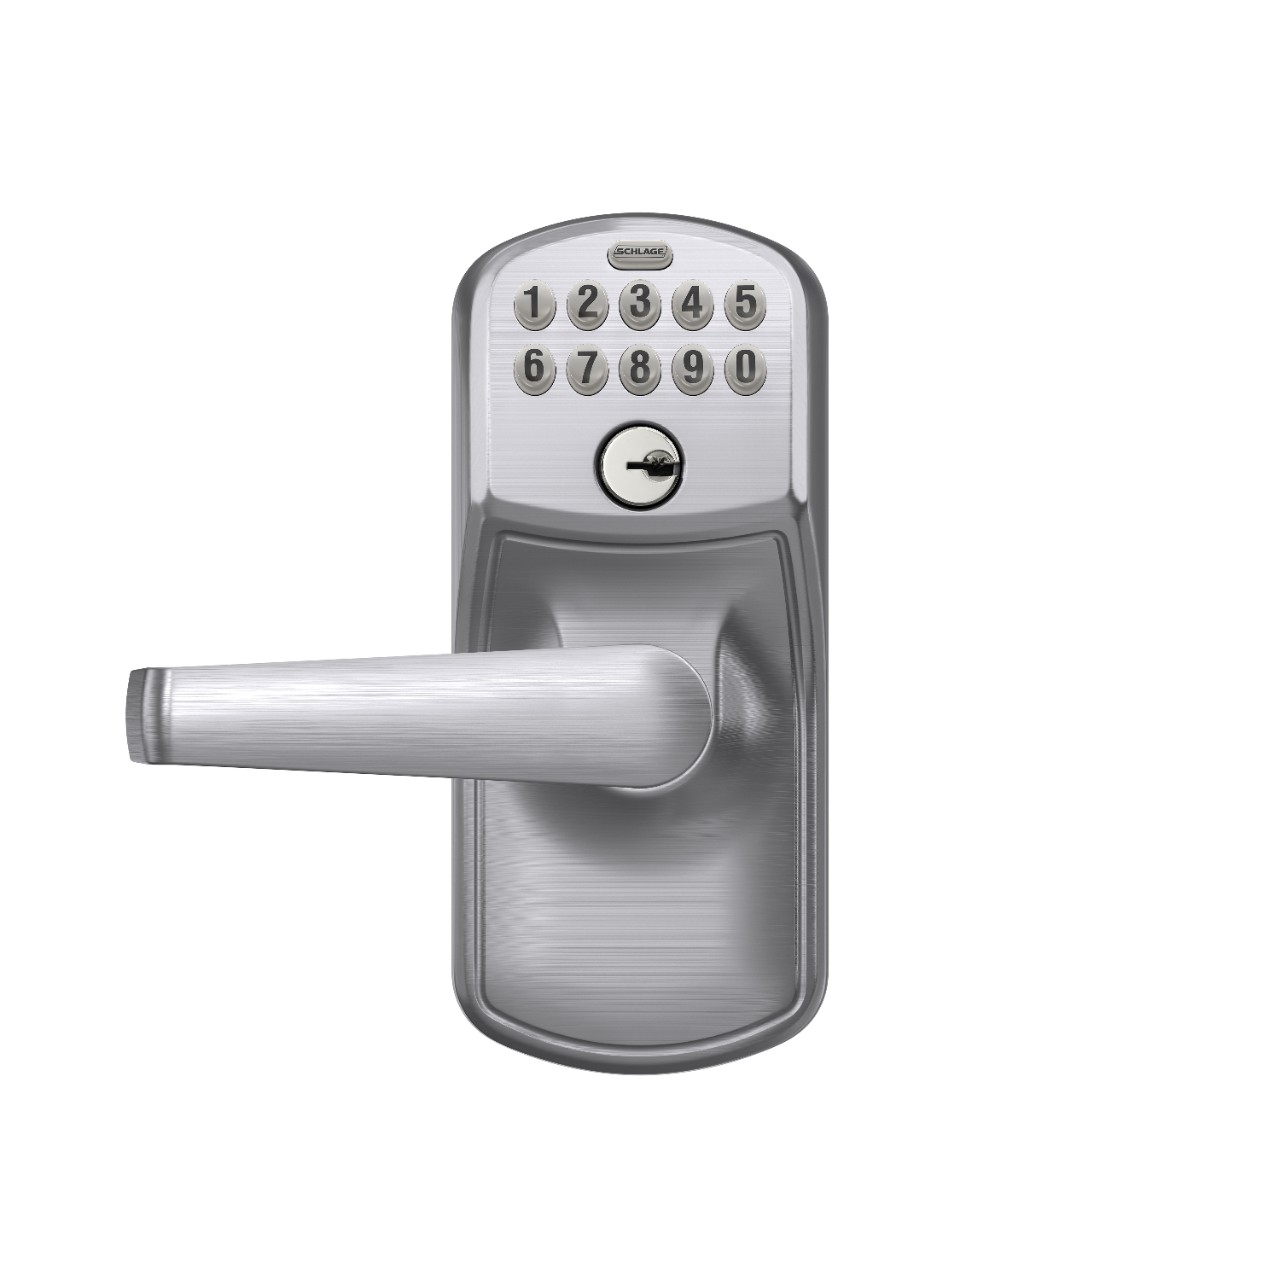 Keypad Lever and Elan Lever with Flex Lock